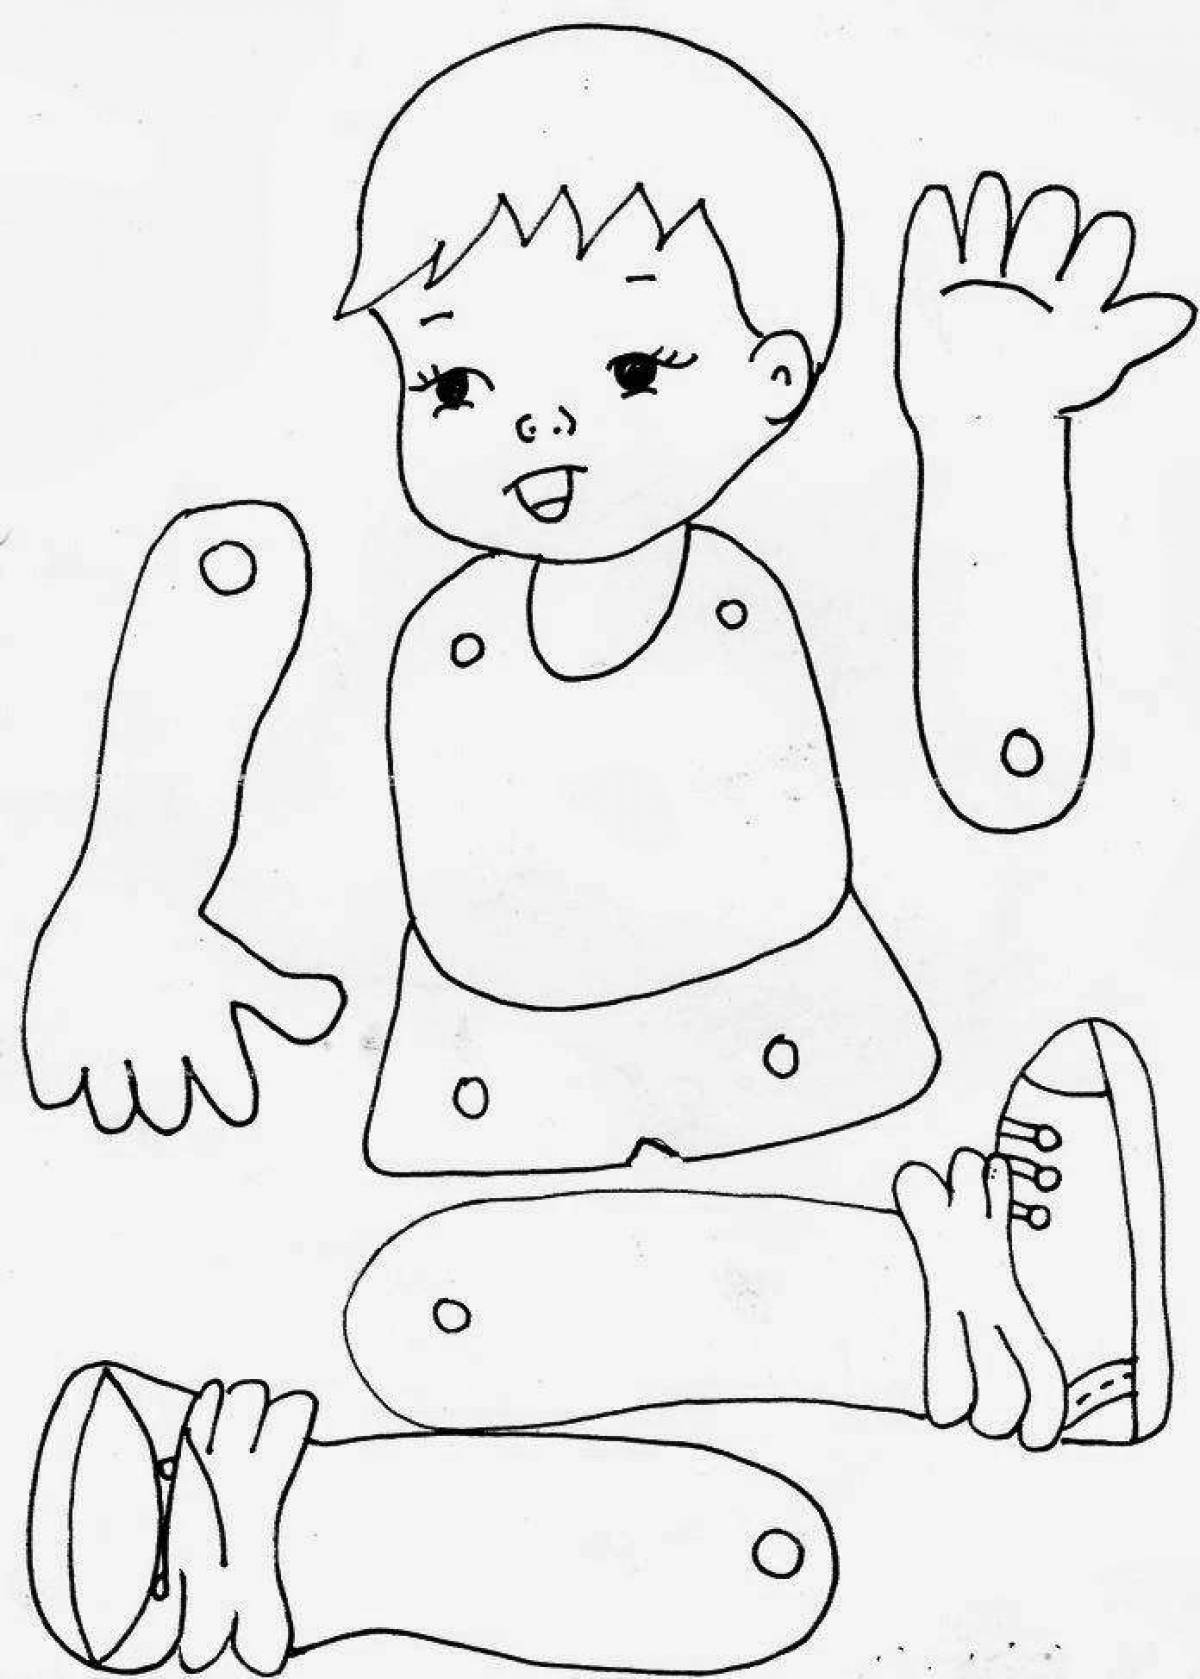 Color-frenzy body parts coloring page